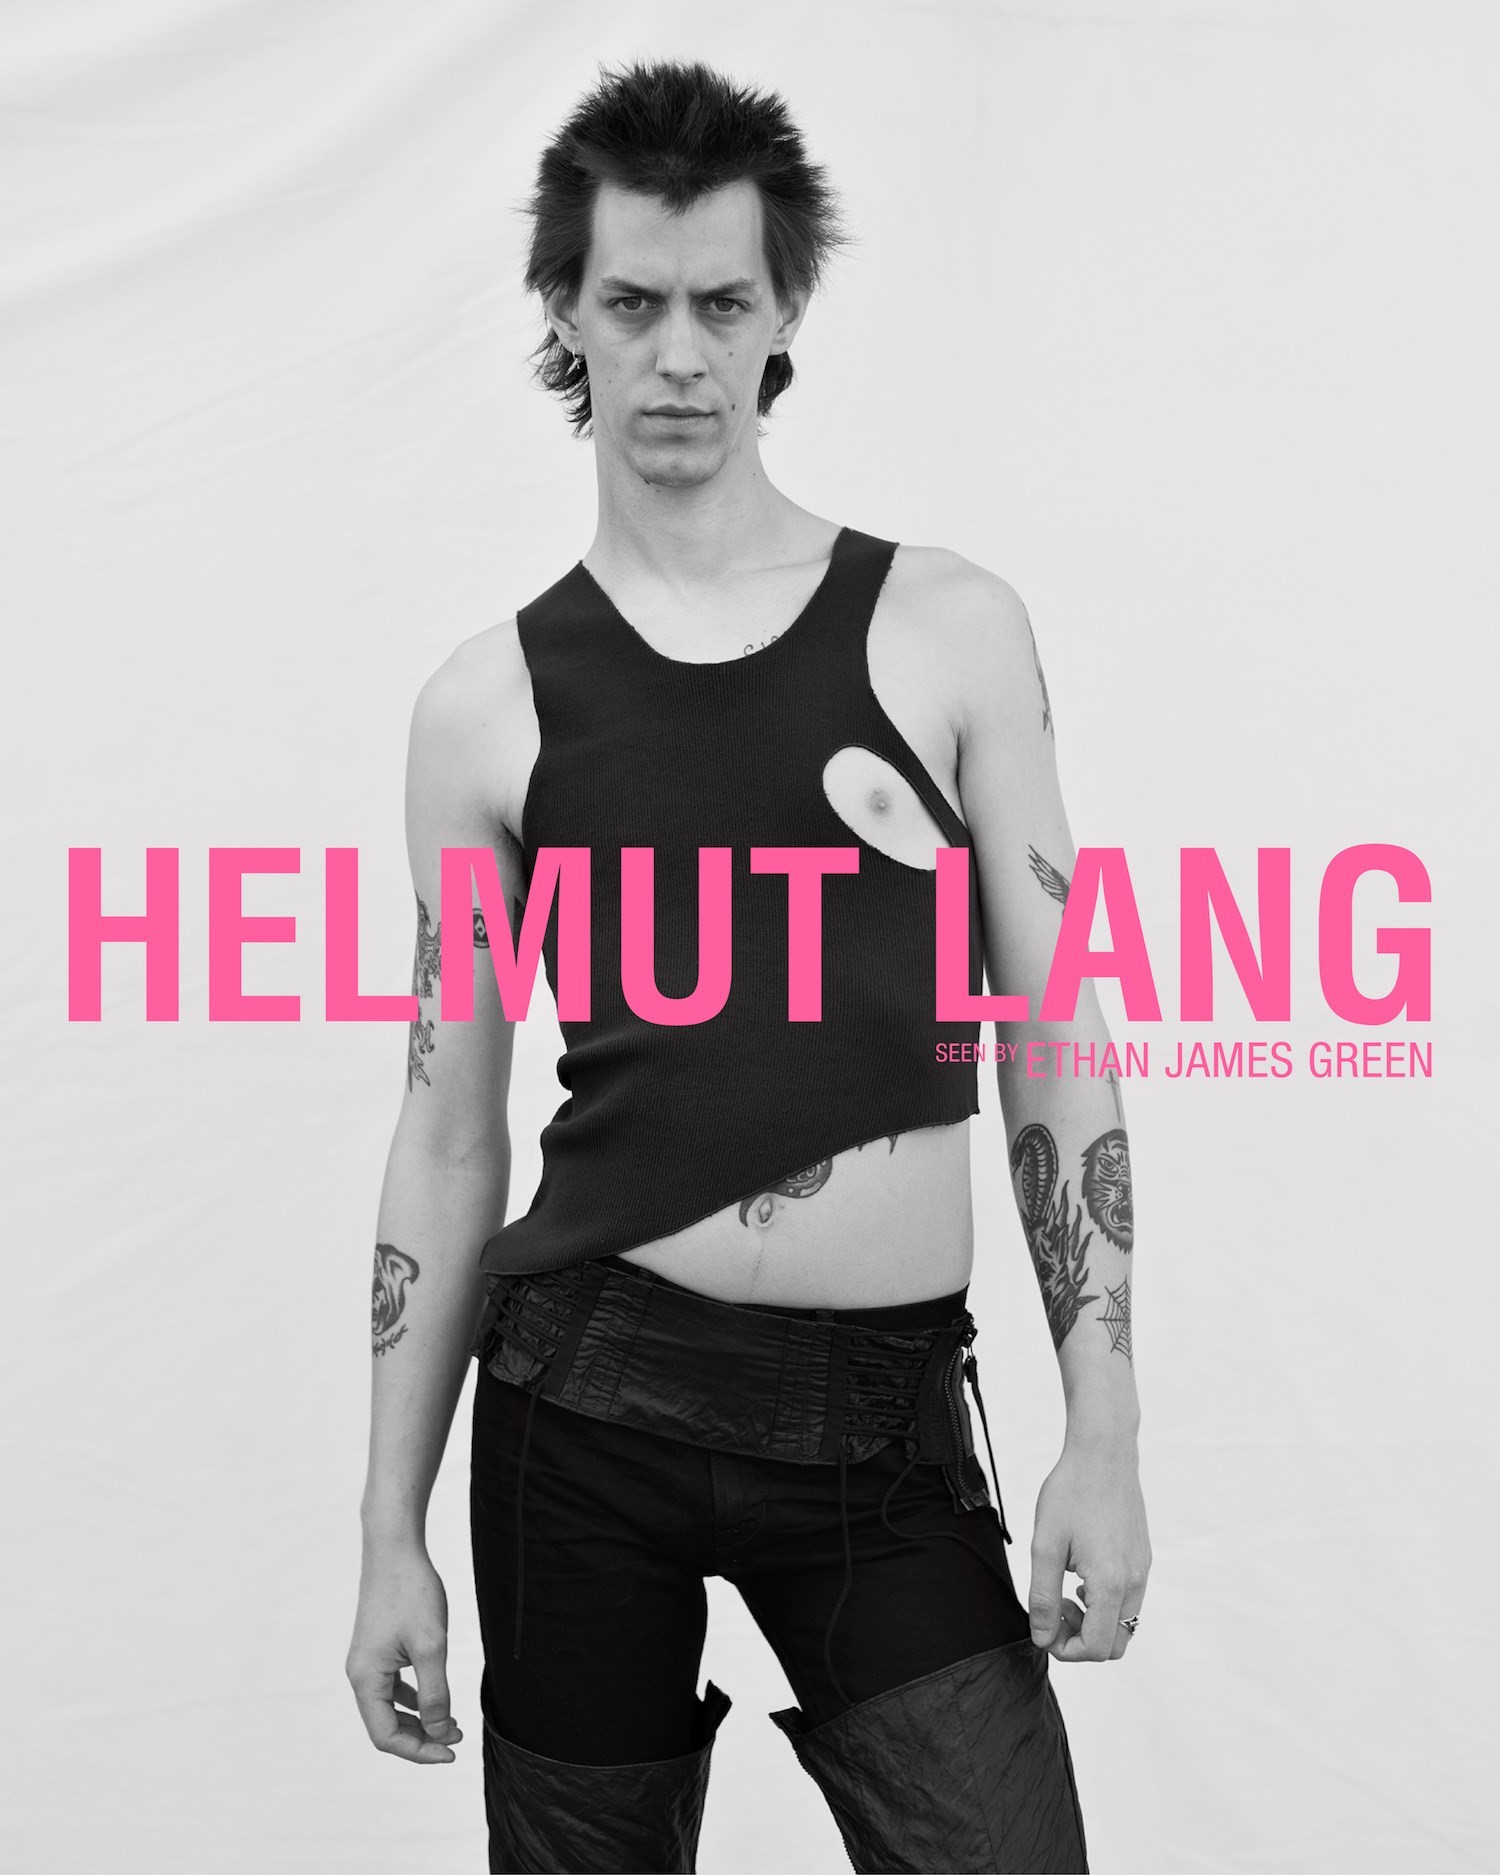 Your First Look at Helmut Lang as Seen by Walter Pfeiffer